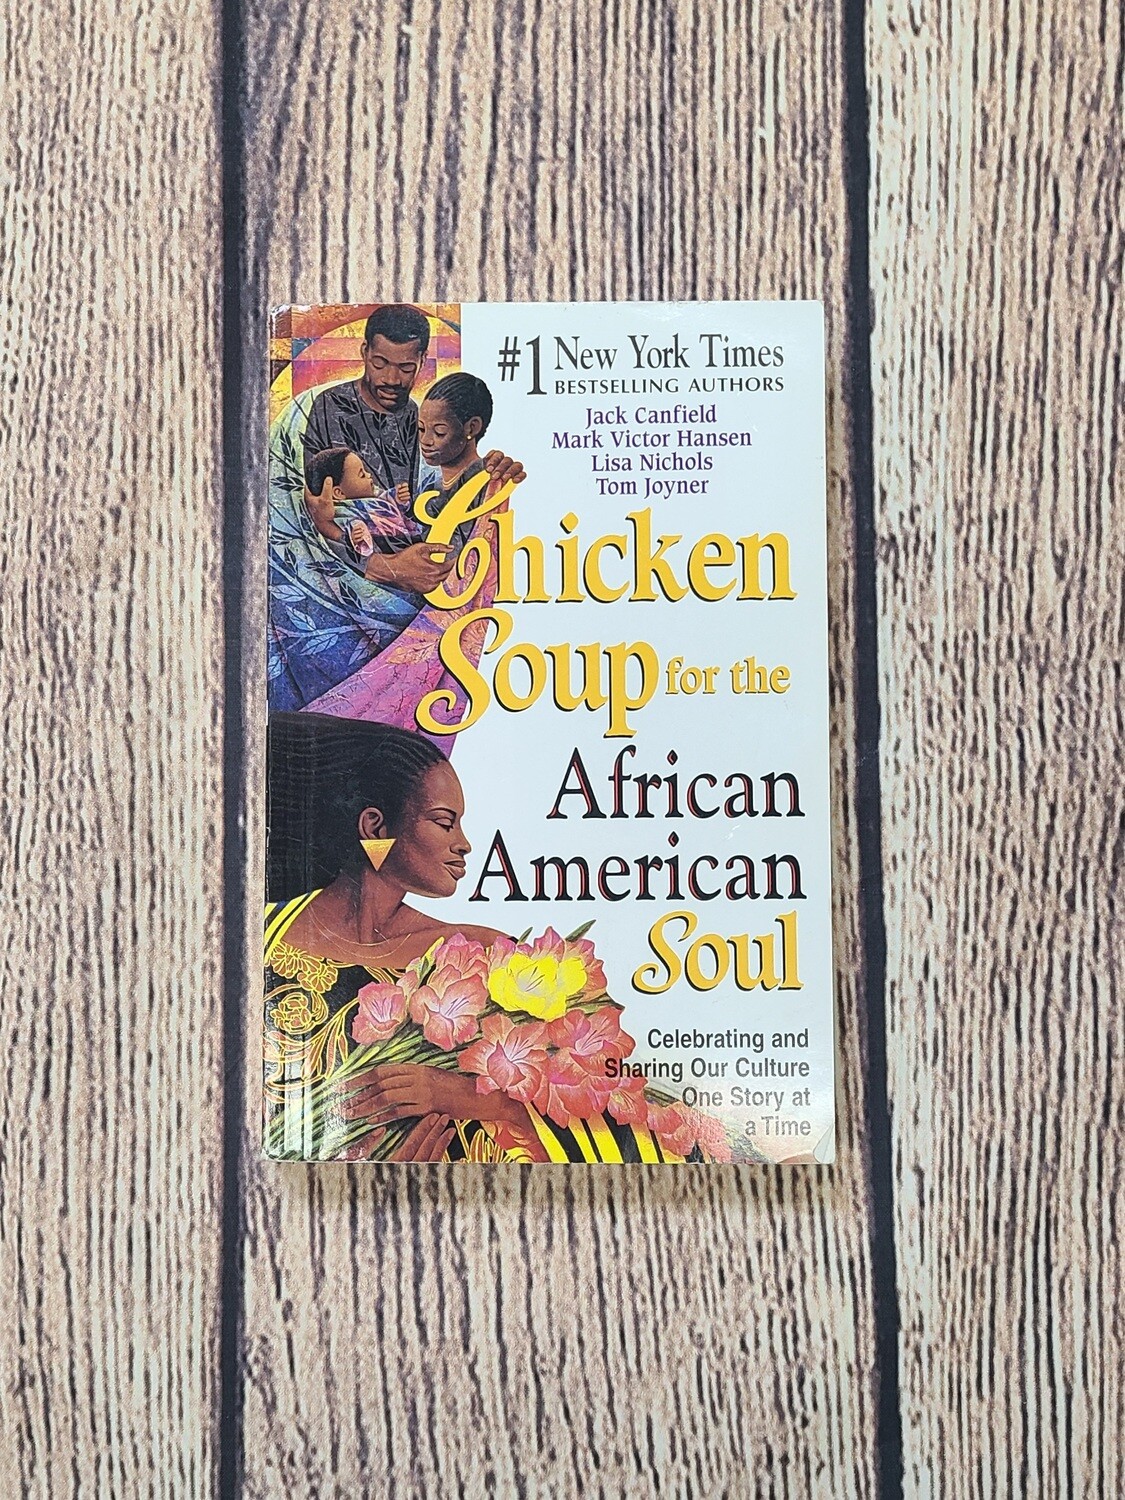 Chicken Soup for the African American Soul by Jack Canfield, Mark Victor Hansen, Lisa Nichols, and Tom Joyner